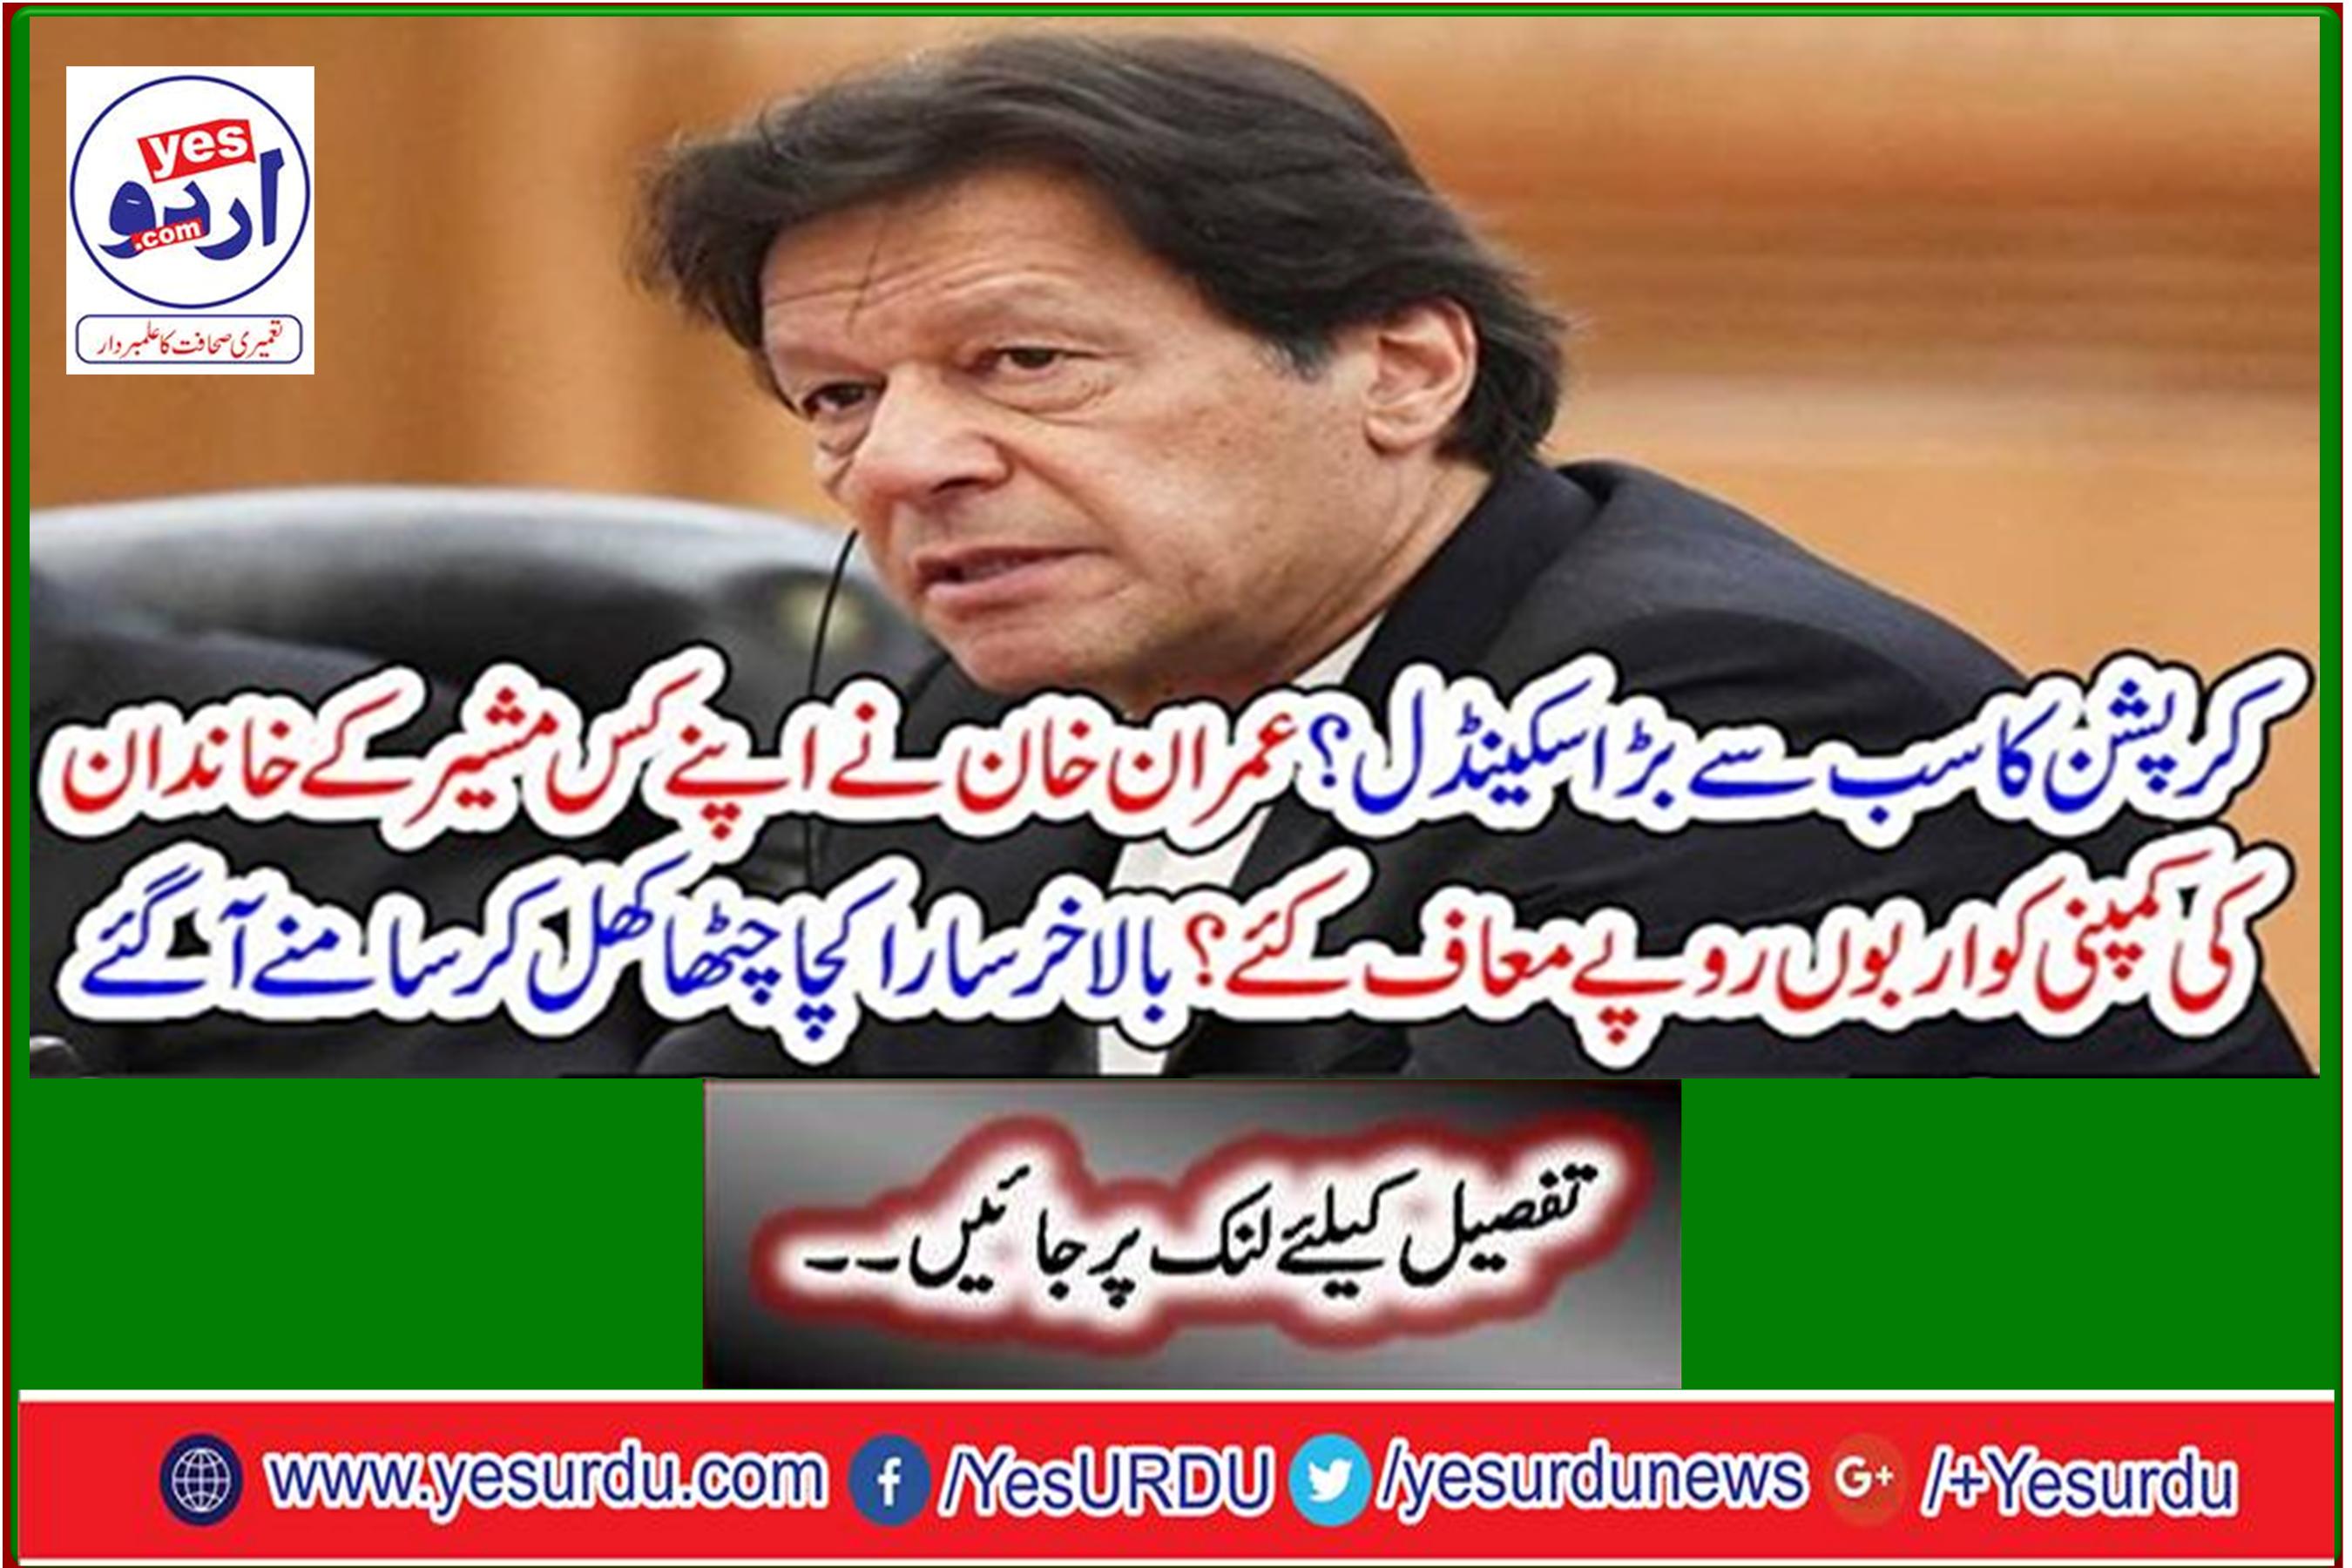 Imran Khan forgives billions of rupees from the family company of which of his advisers?